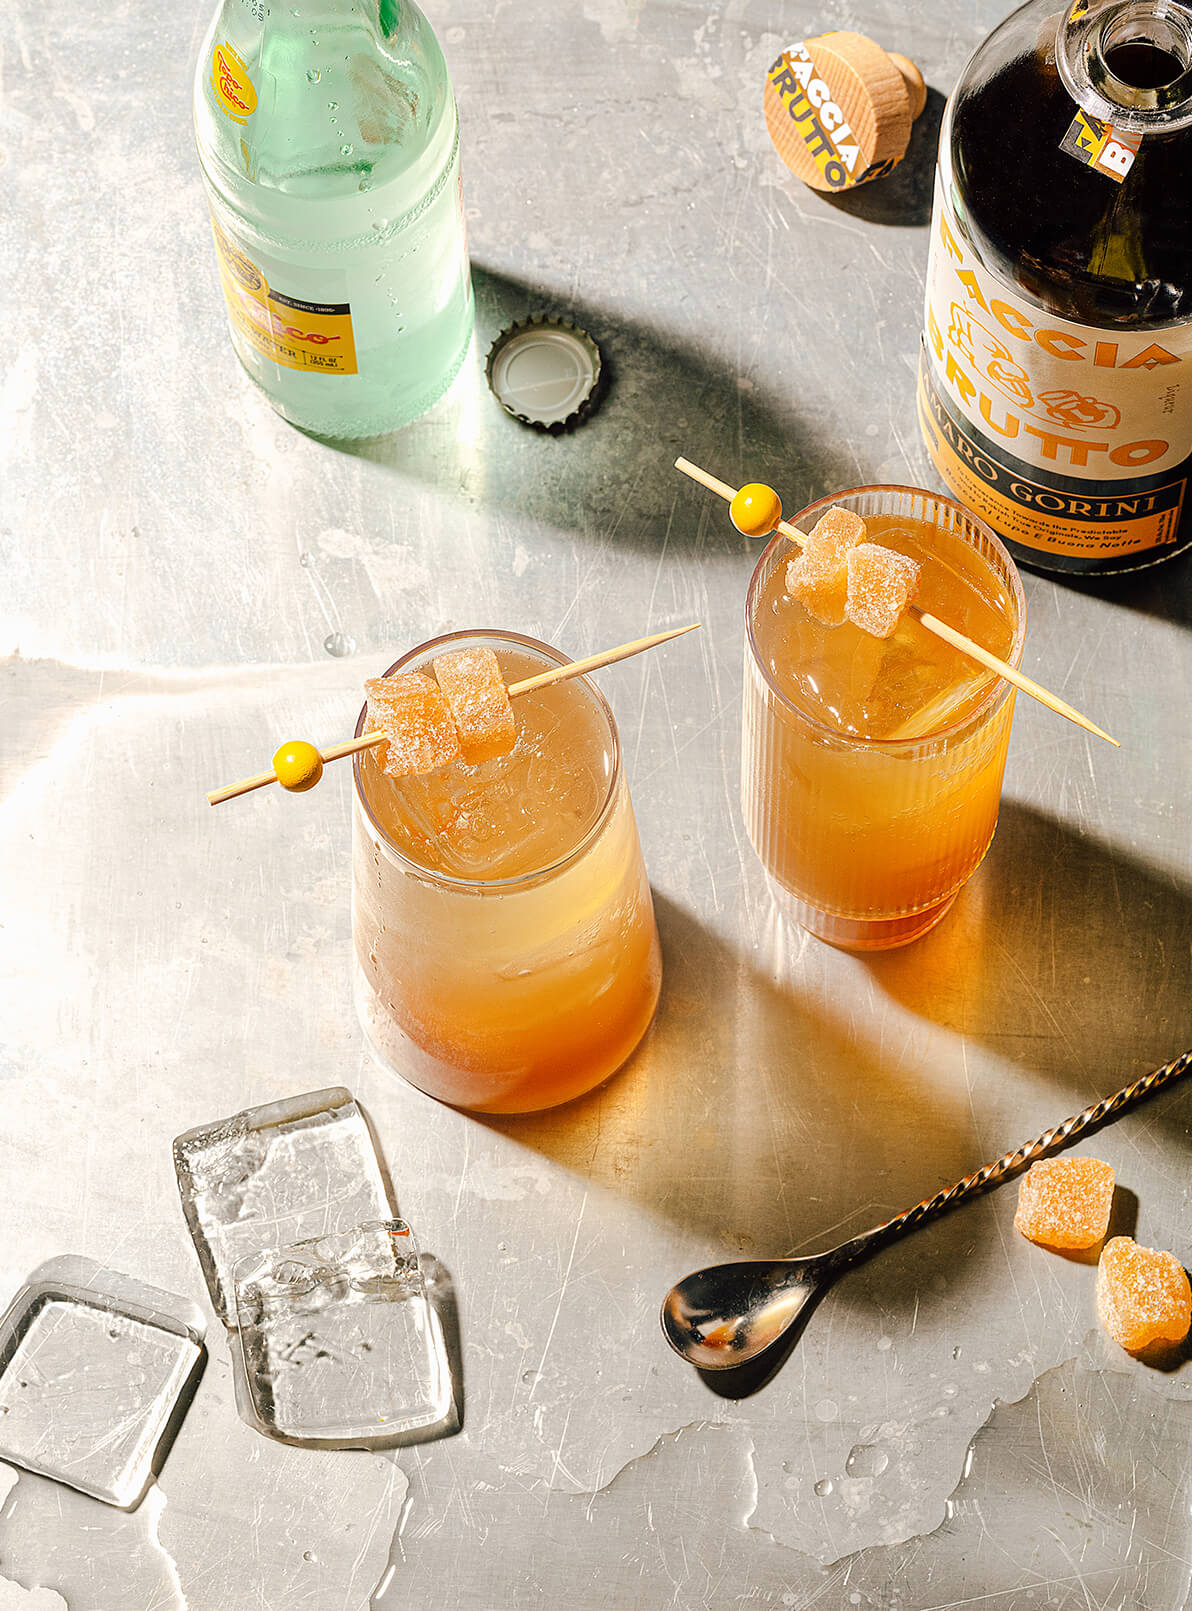 Two tall cocktails with ice and garnishes, bottle of Topo Chico and bottle of Faccia Brutto Amaro Gorini